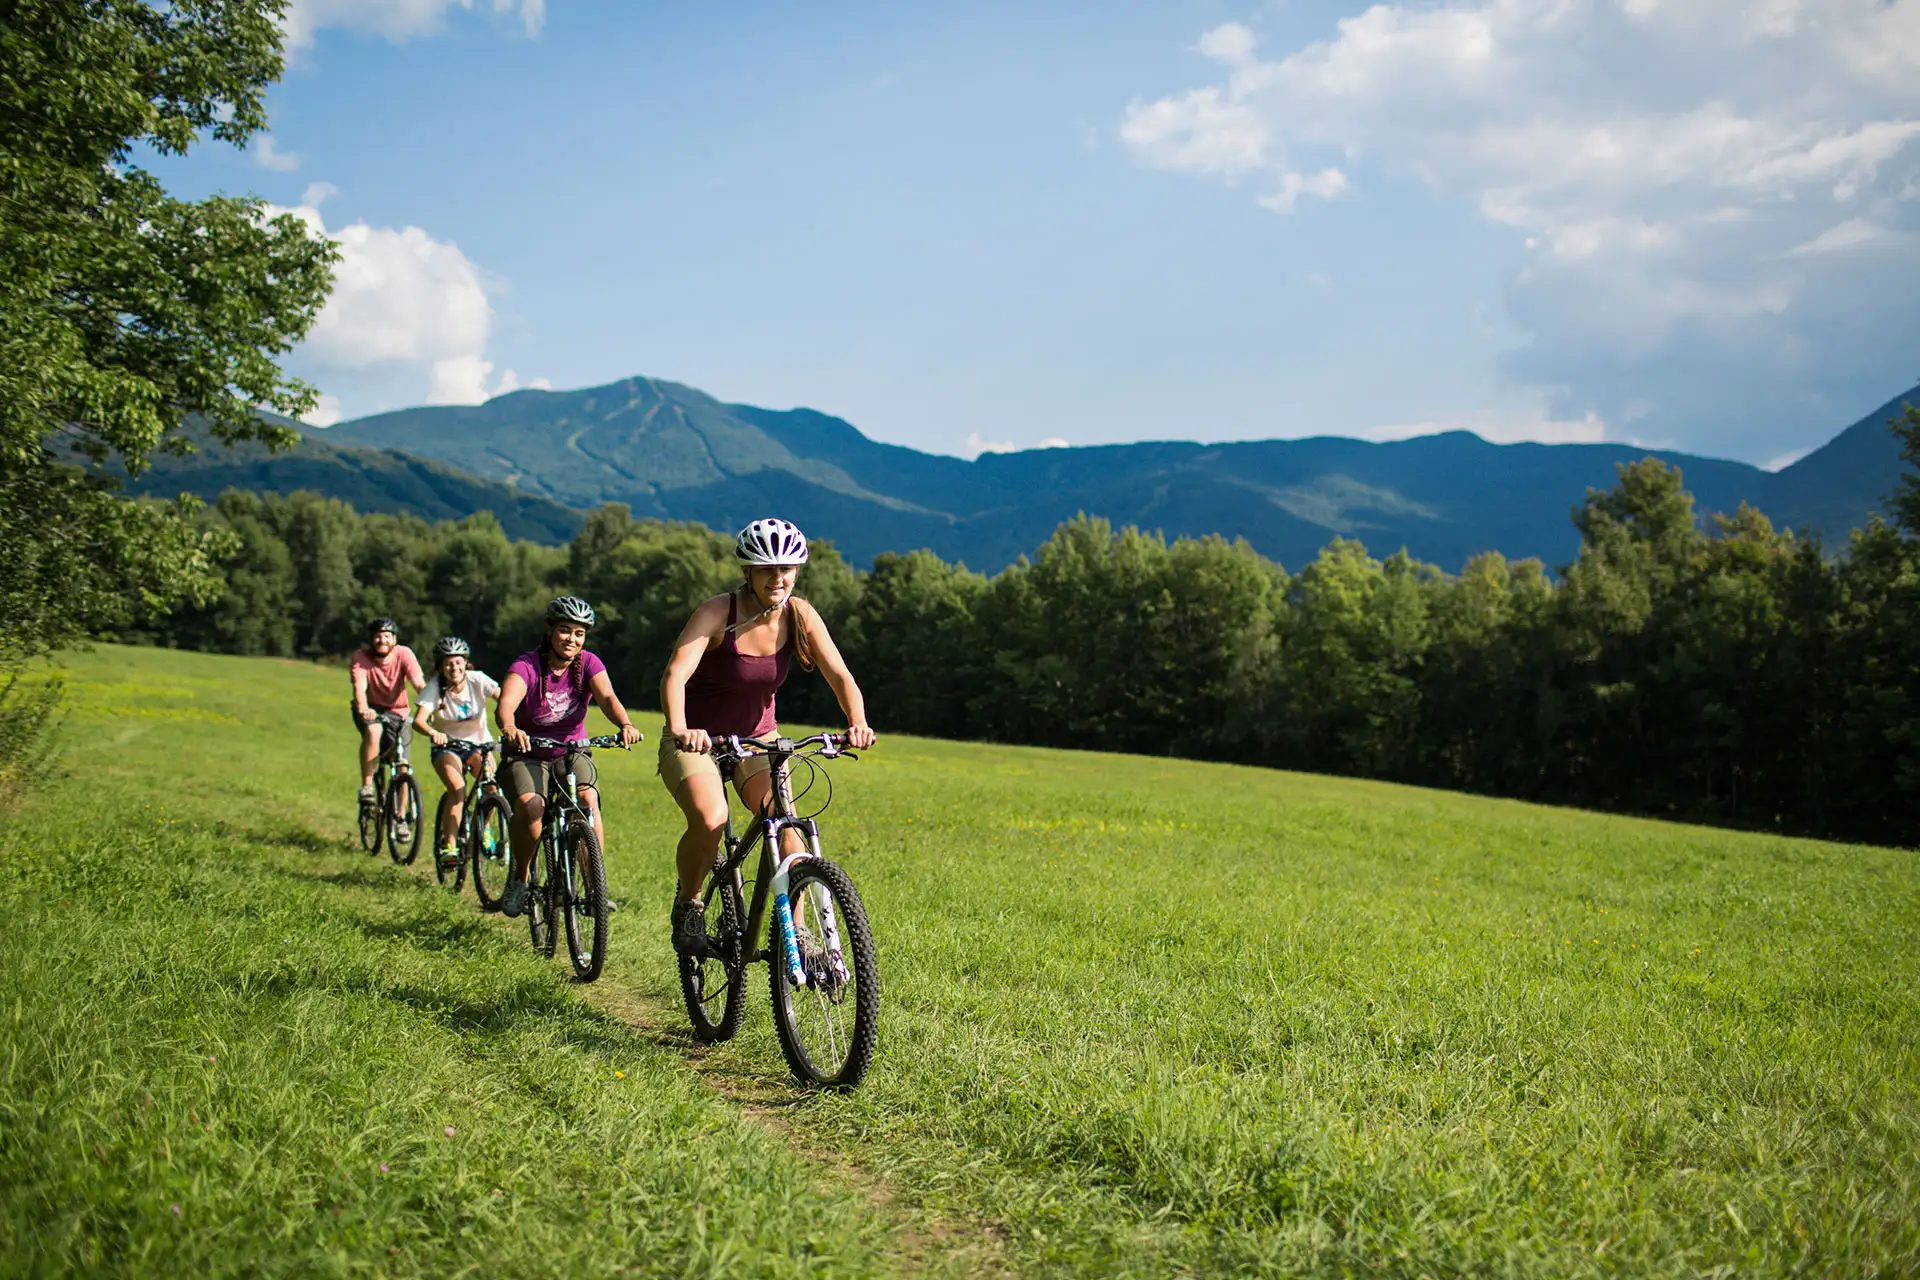 Biking at Smugglers' Notch in Vermont; Courtesy of Smugglers' Notch